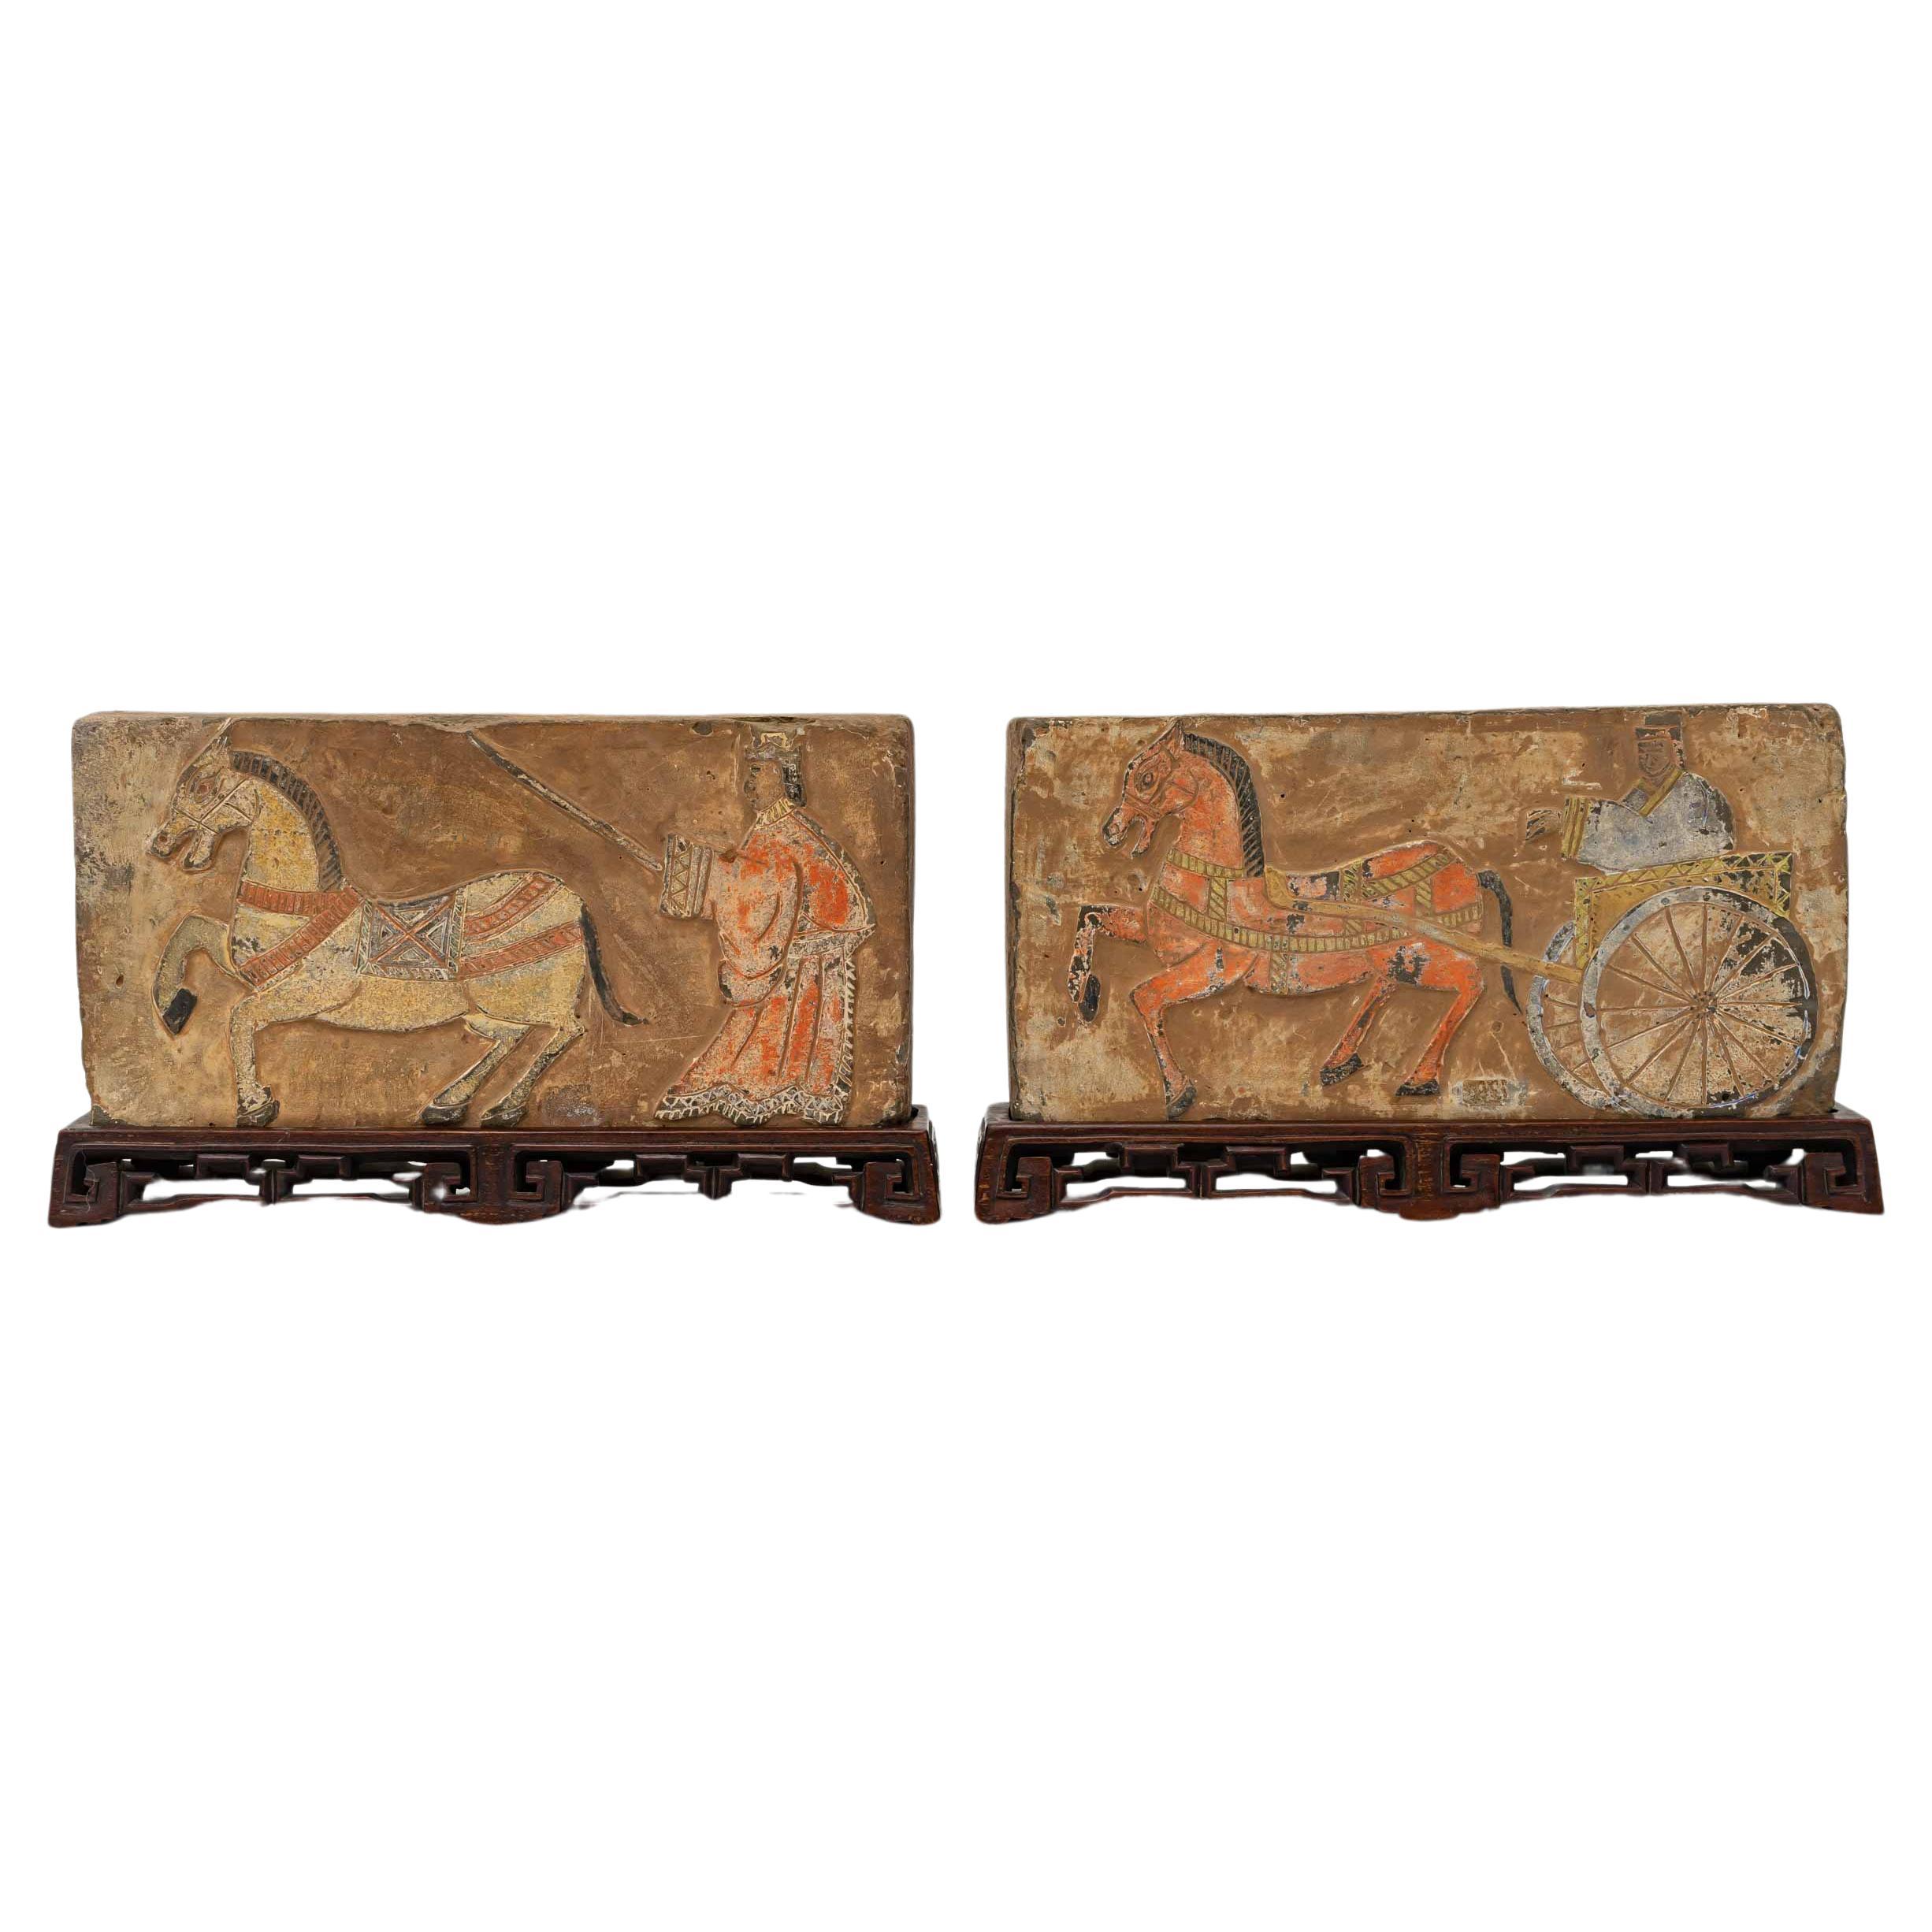 Pair Of Terracotta Brick With Trace Of Polychromy - Style: Han - Period: XIXth For Sale